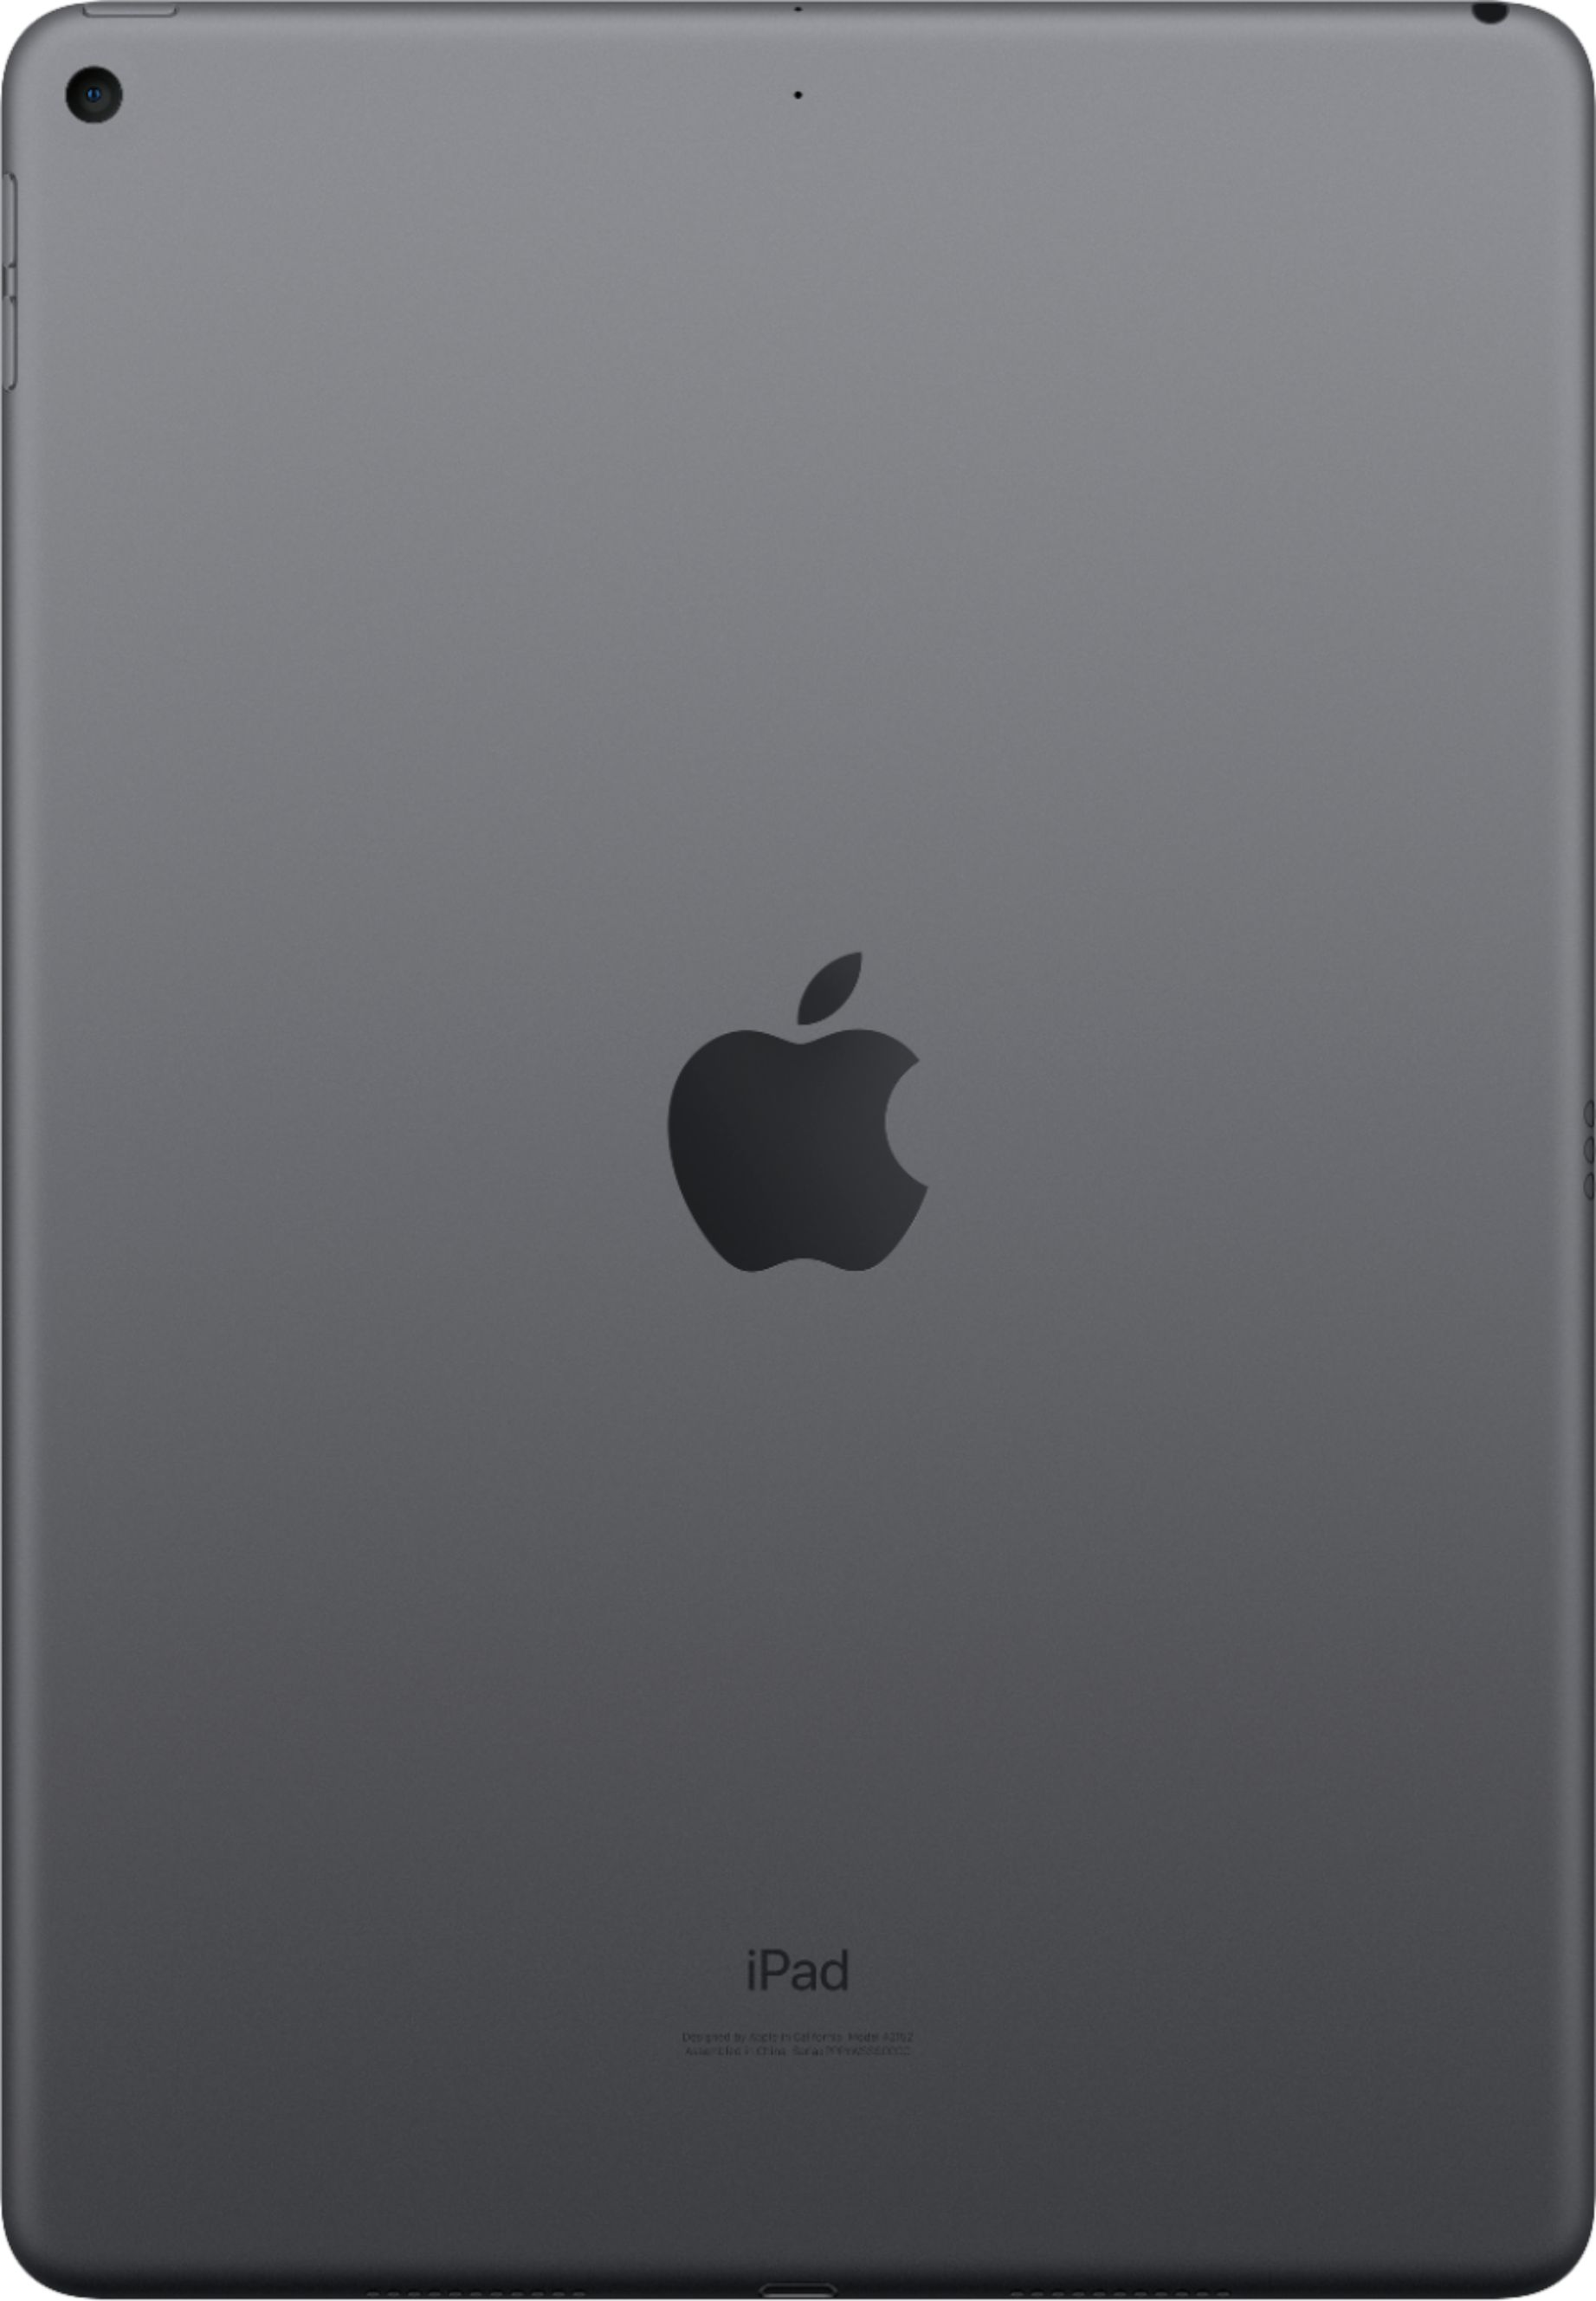 Back View: Apple - Geek Squad Certified Refurbished 9.7-Inch iPad Pro with WiFi - 128GB - Silver